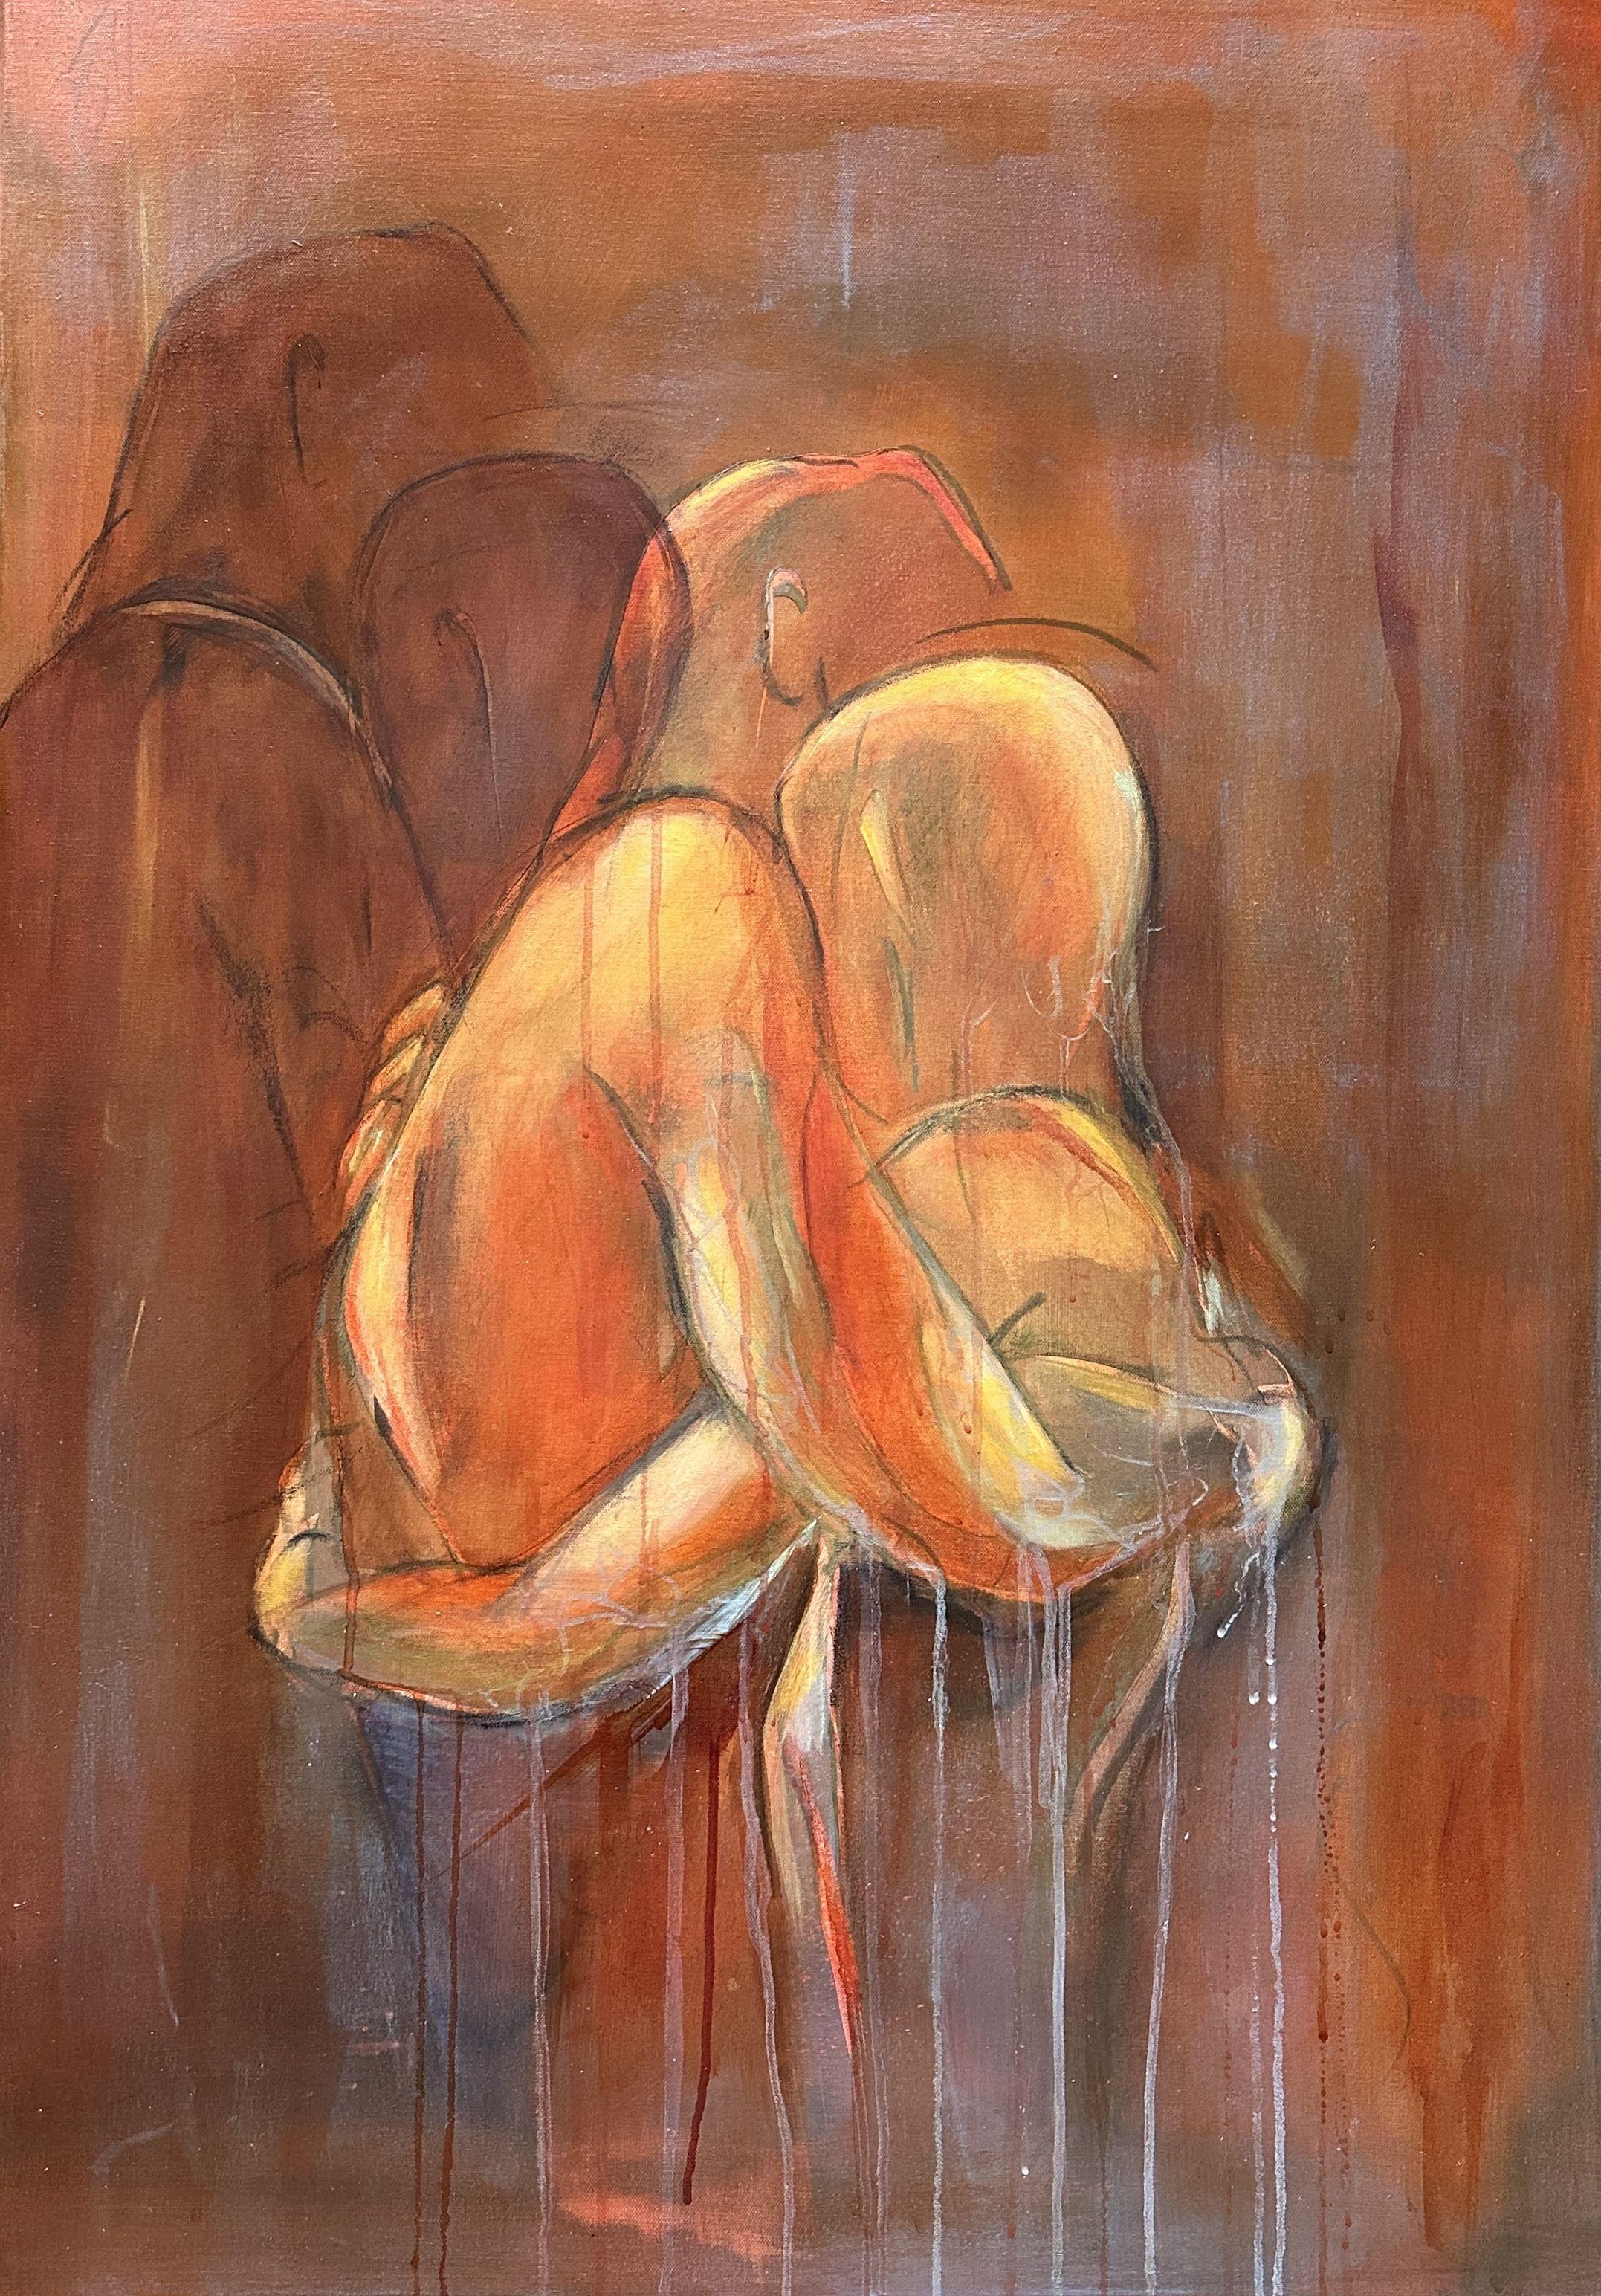 Each hug is configured in a different way, expressing a different emotion and bond, based on the relationship and the unique individualities of the encounter.    The picture frame is not necessary, the edges of the canvas are painted and a varnish